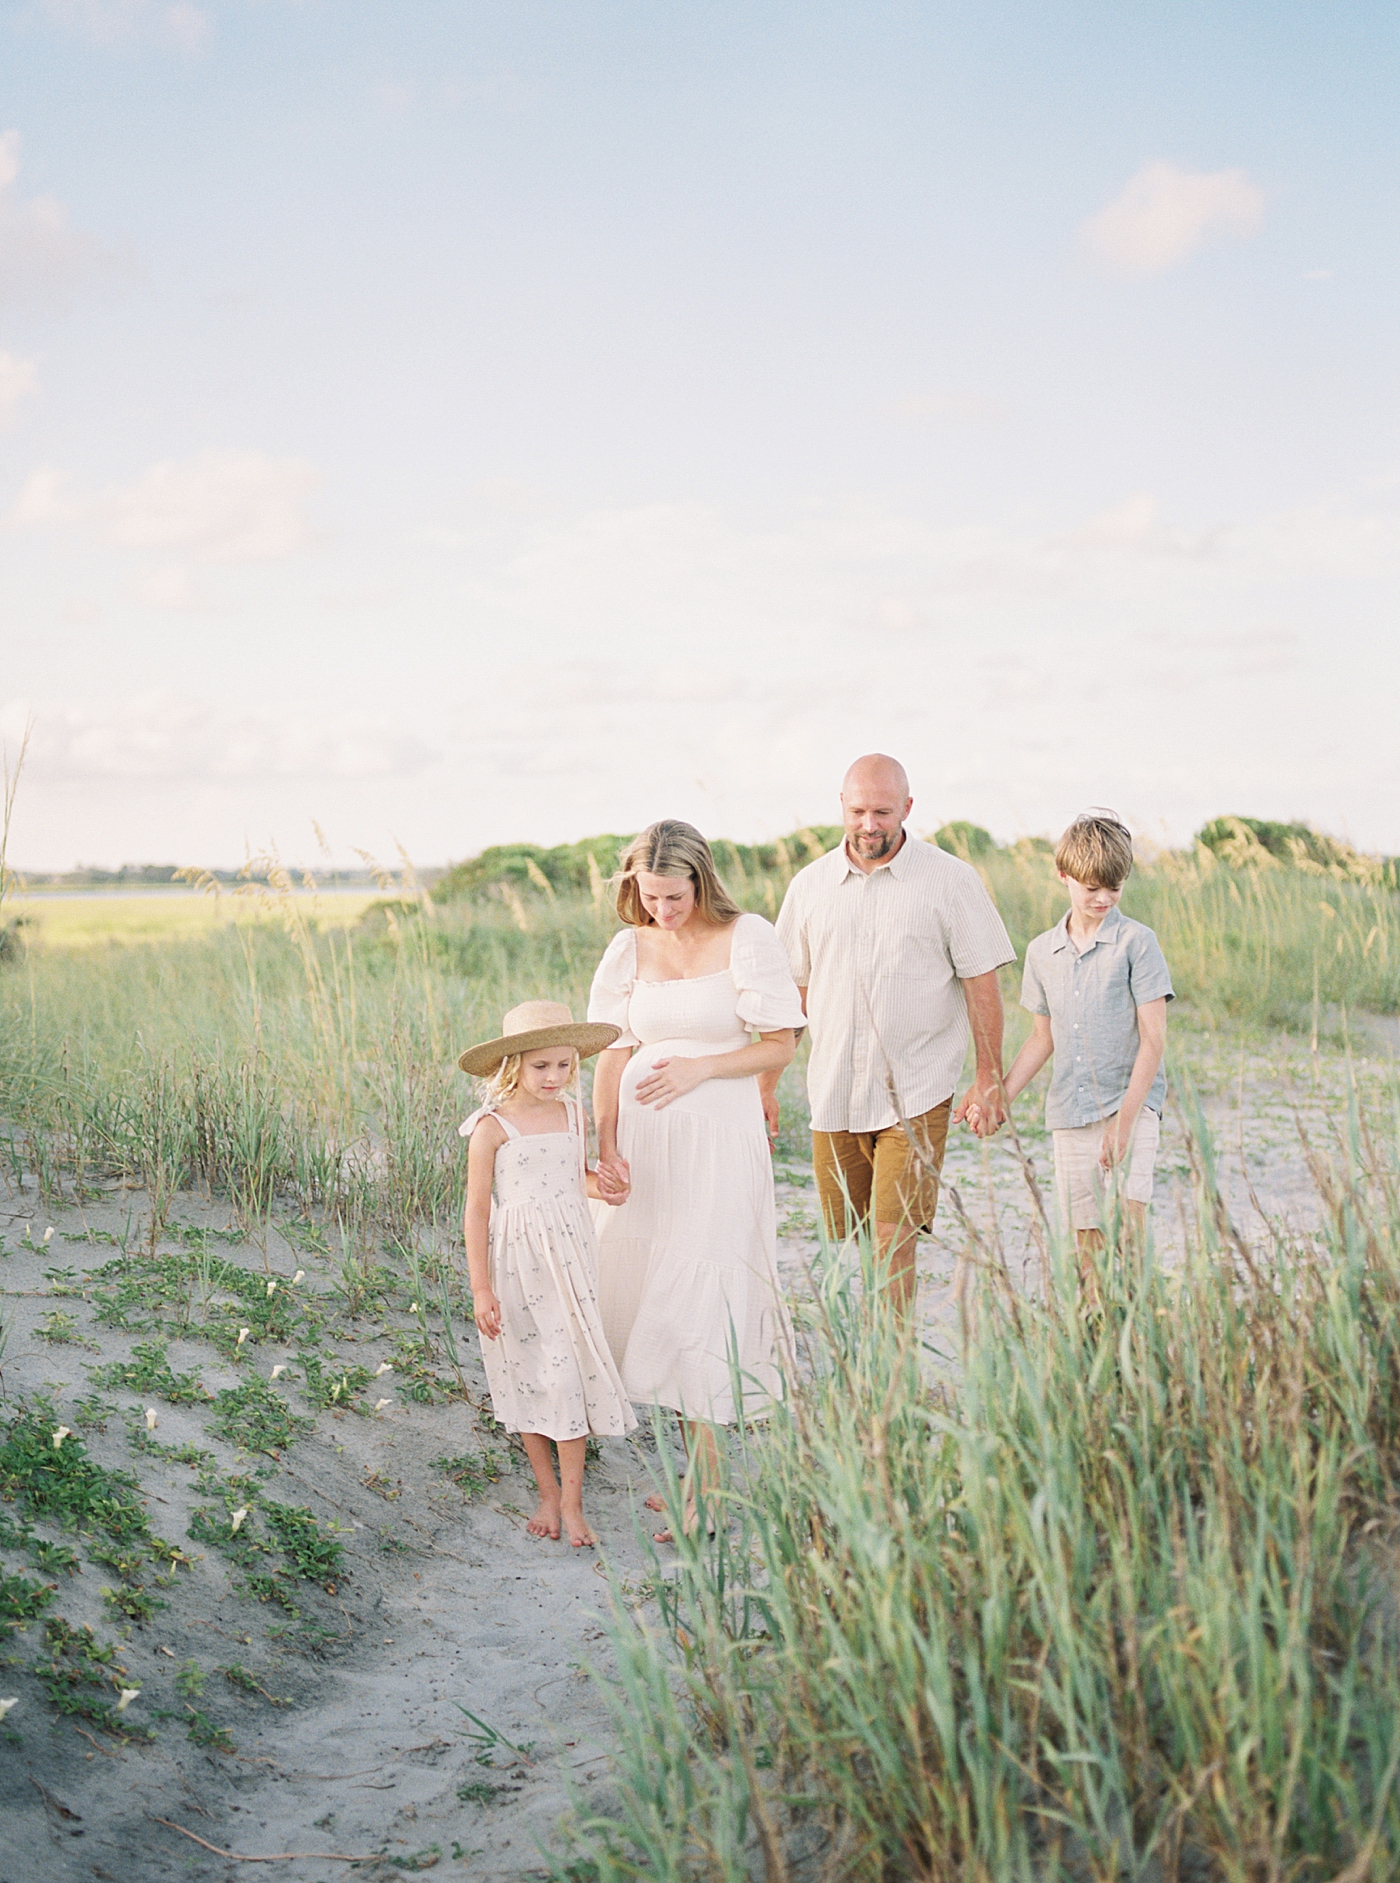 Family of four walking holding hands during their Maternity Session at Folly Beach | Image by Caitlyn Motycka